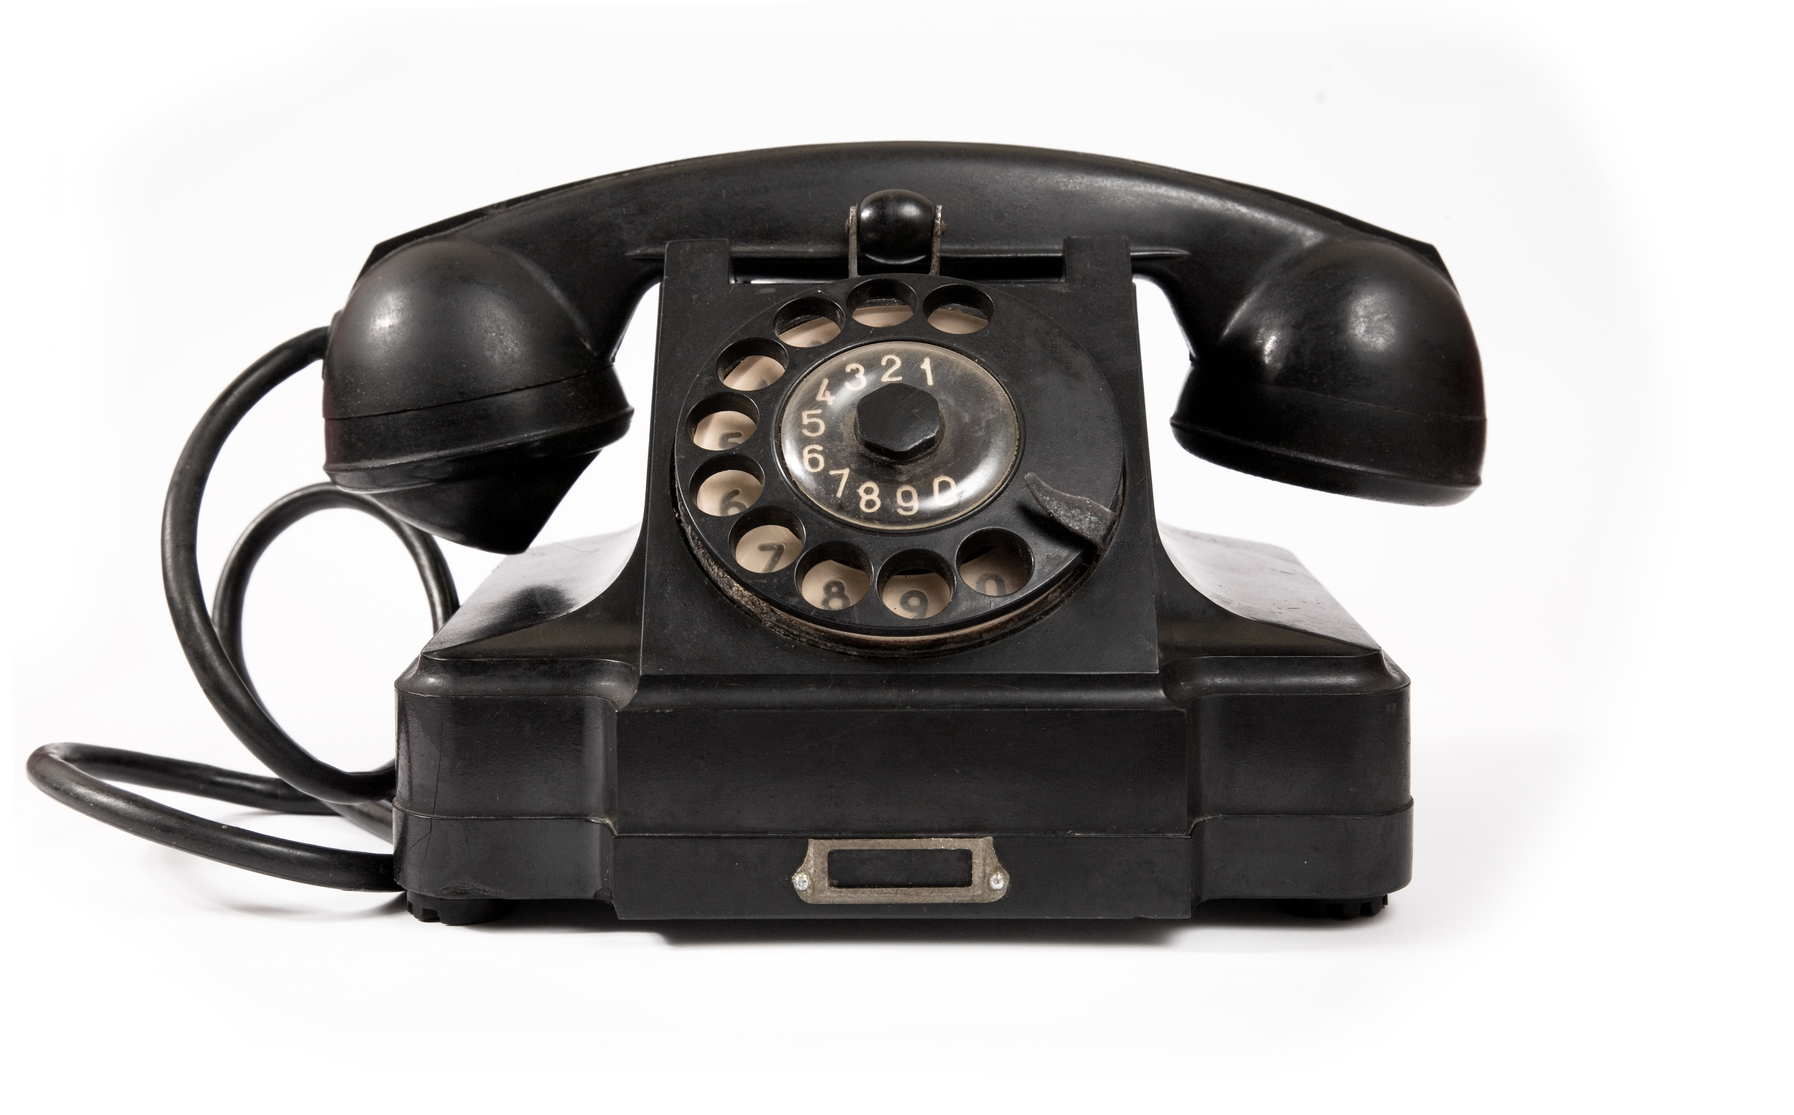 Answering the phone, aka lead management